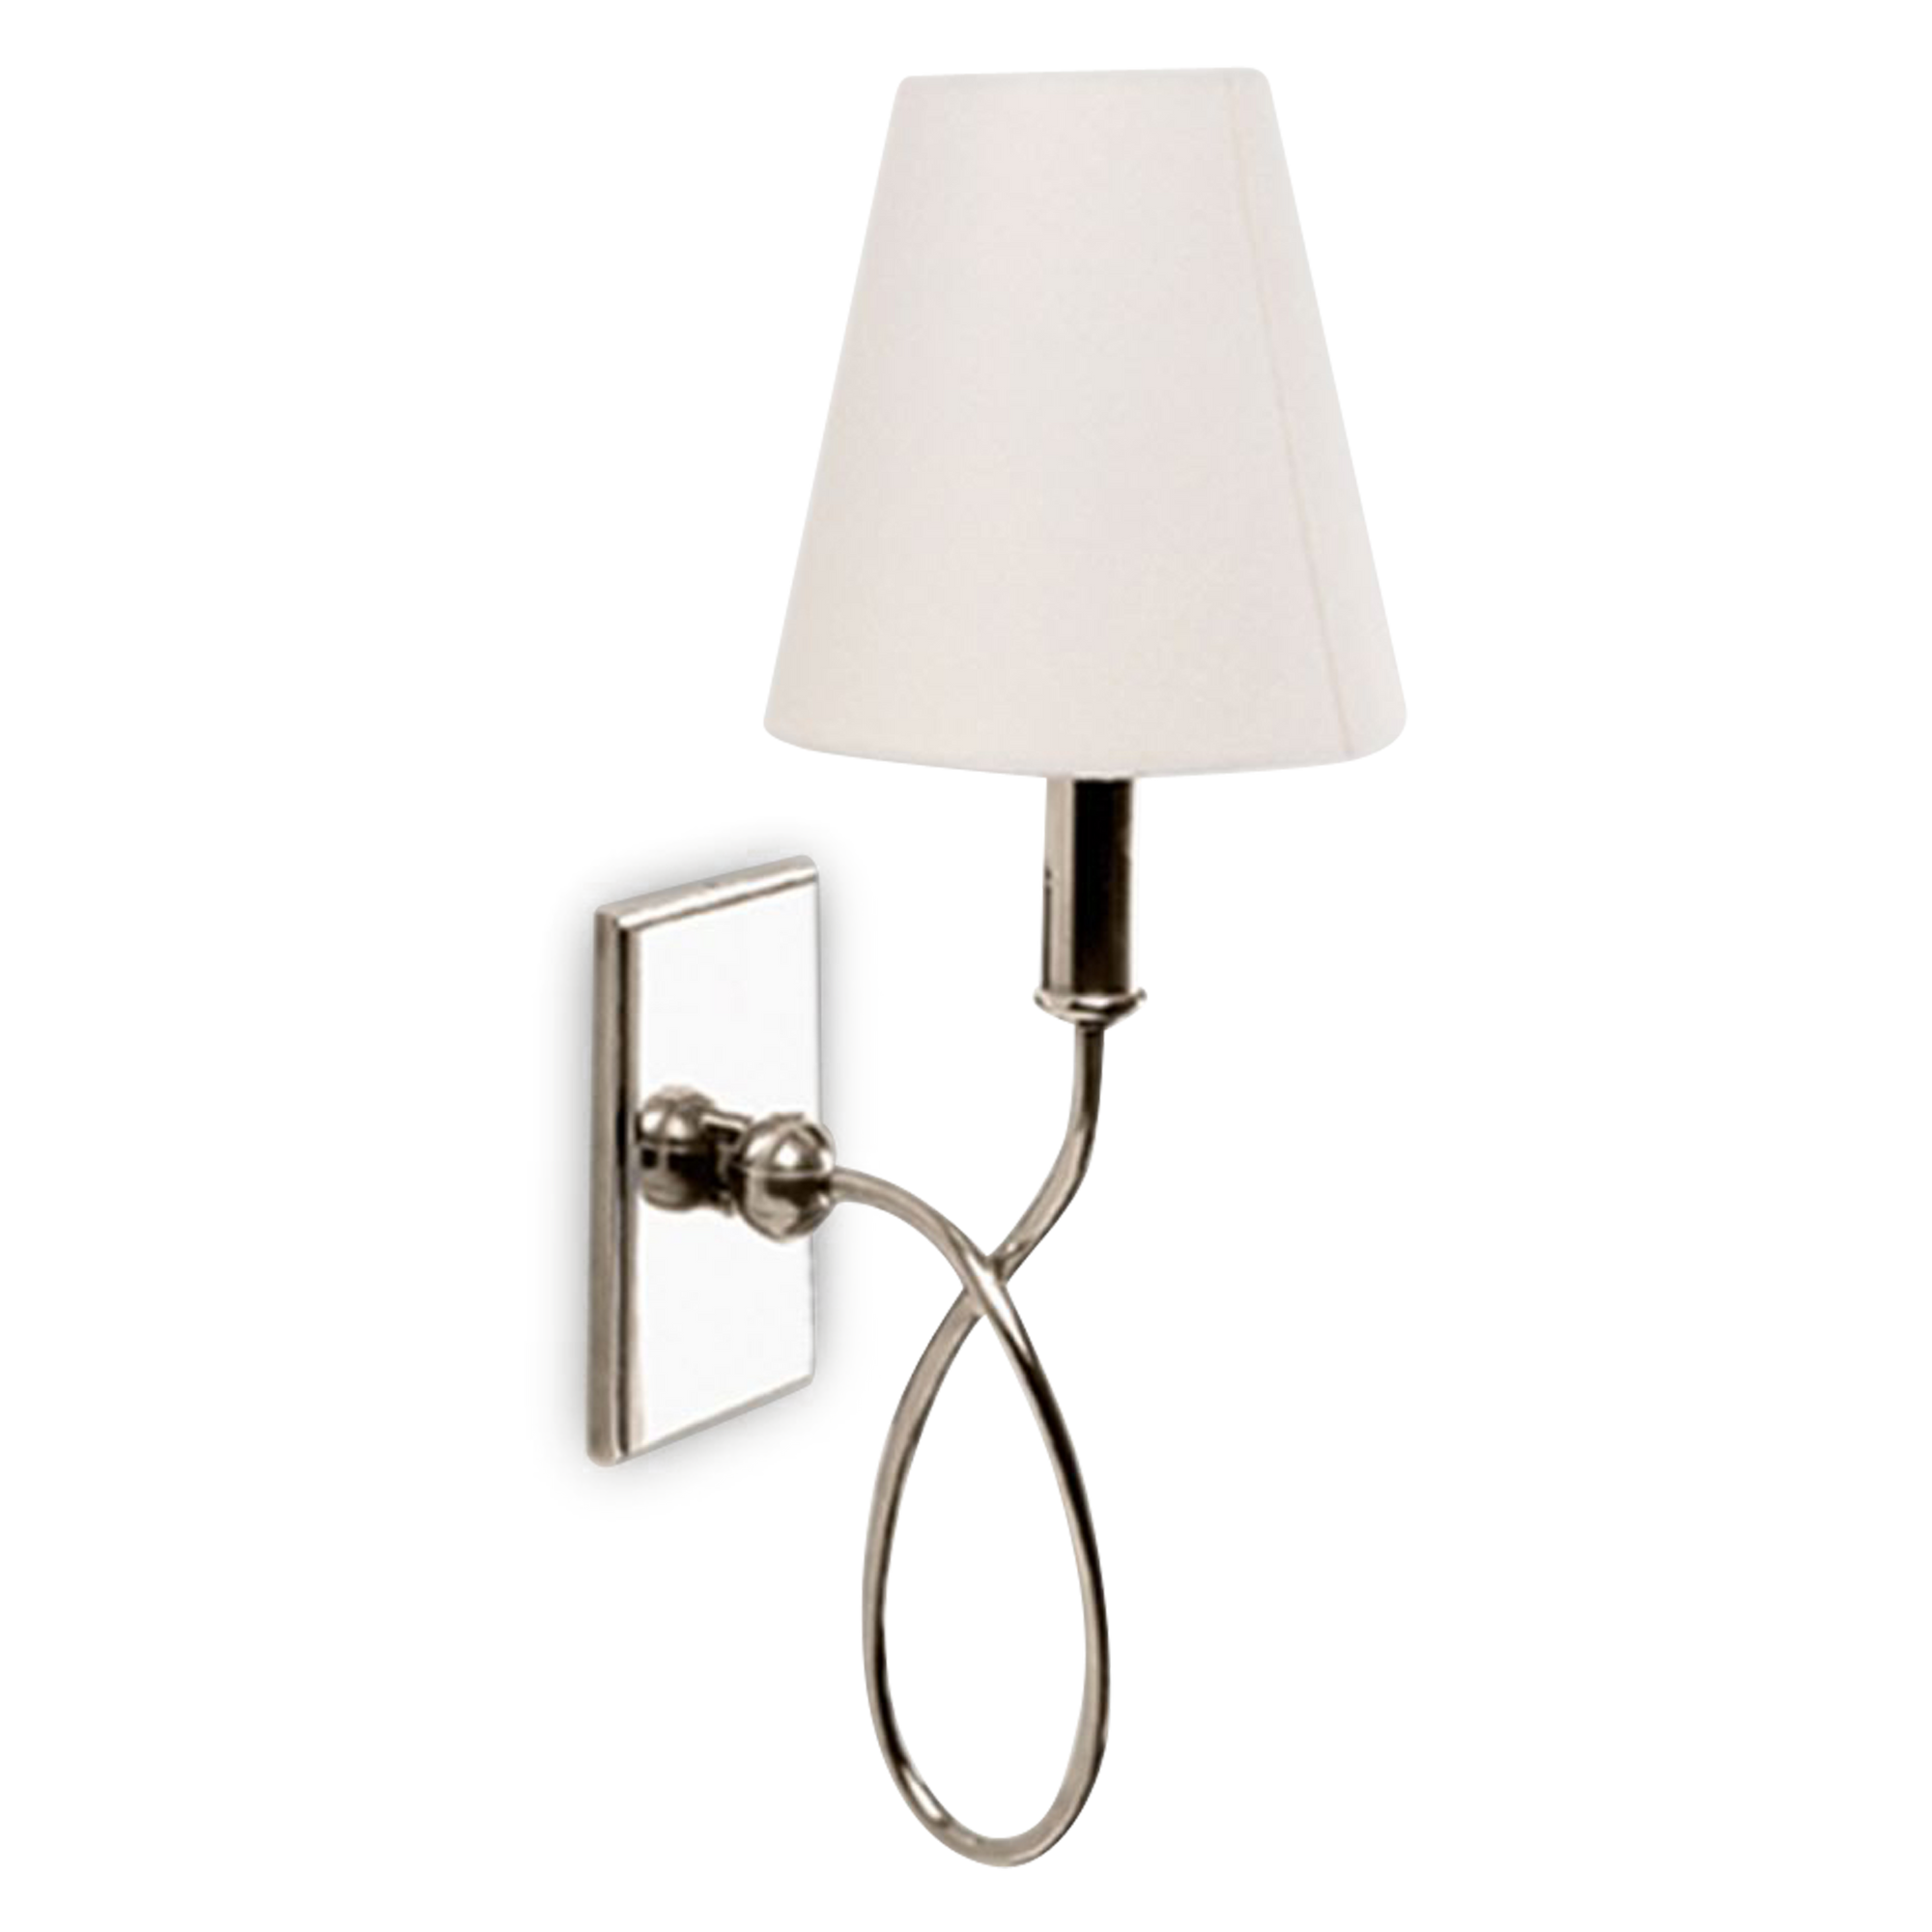 A transitional polished nickel sconce with a looped arm and a white fabric shade.